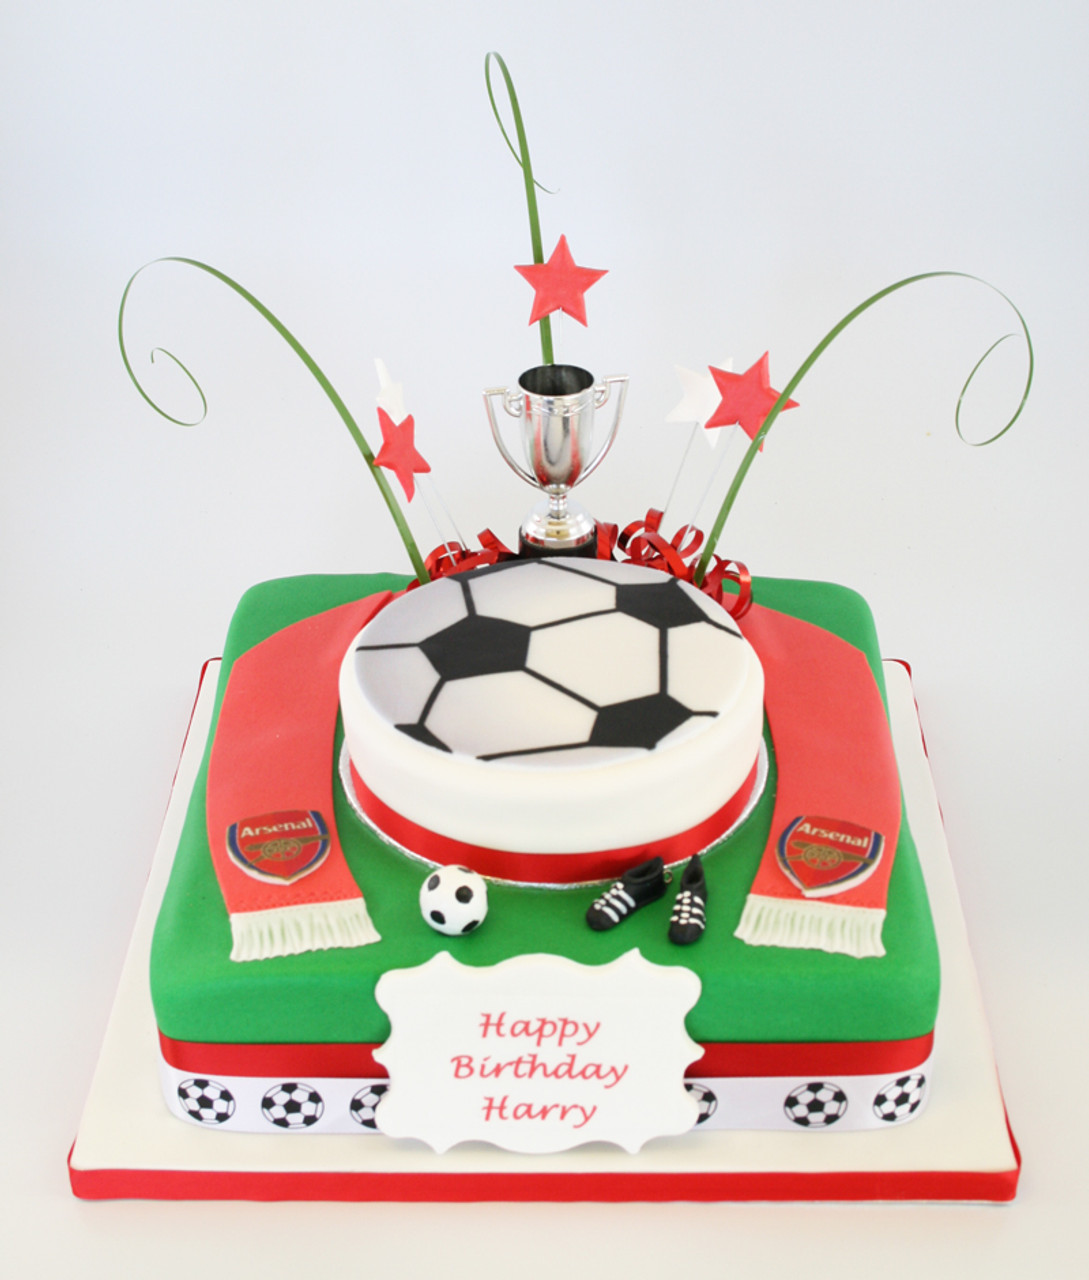 Arsenal Birthday Cake + Cupcakes – bespoke + custom cakes + cupcakes for  special occasions